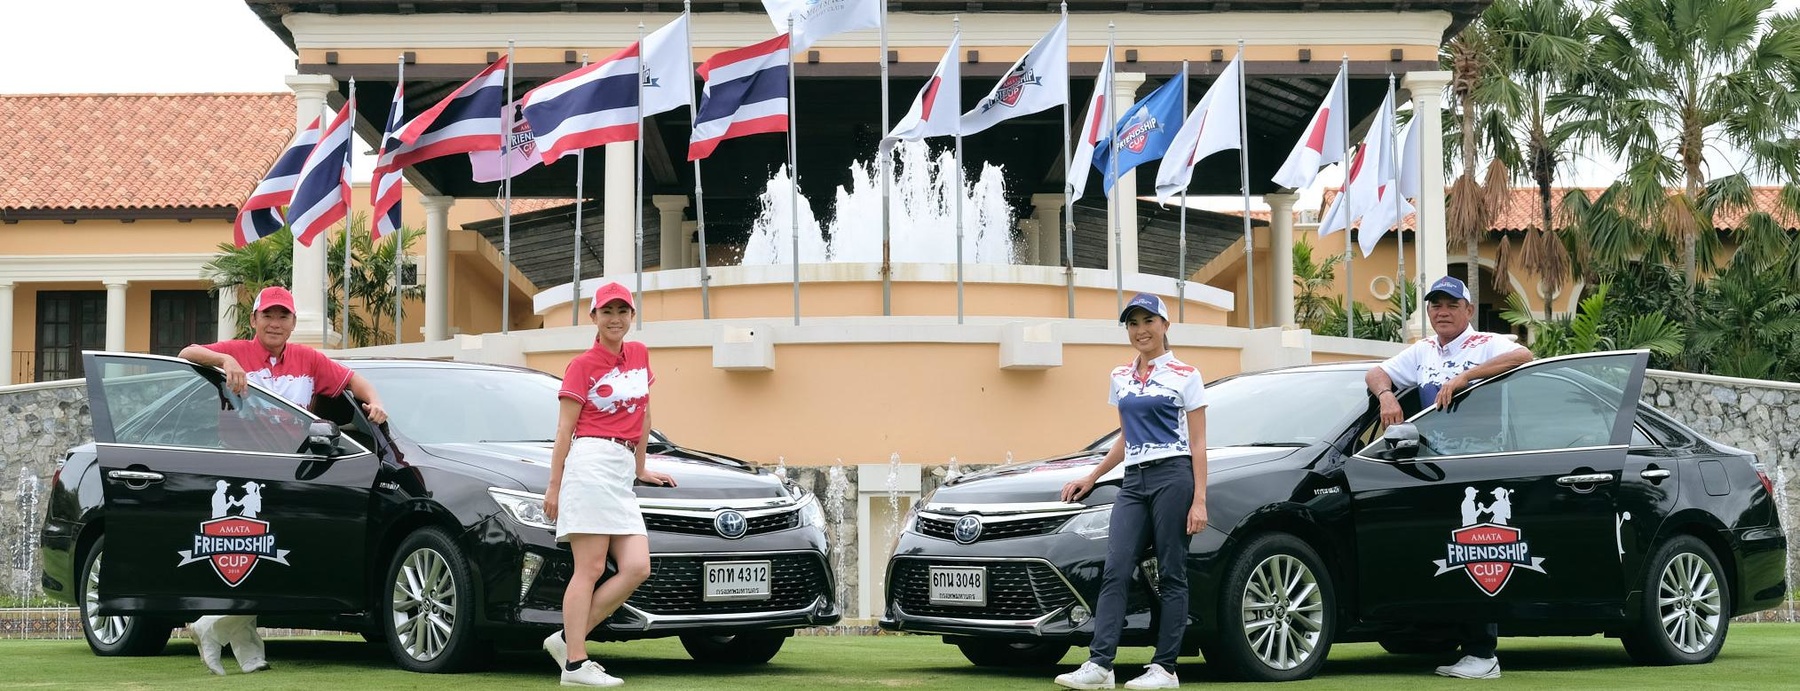 The Amata Friendship Cup presented by cropToyota, hosted at Amata Spring Country Club, Thailand